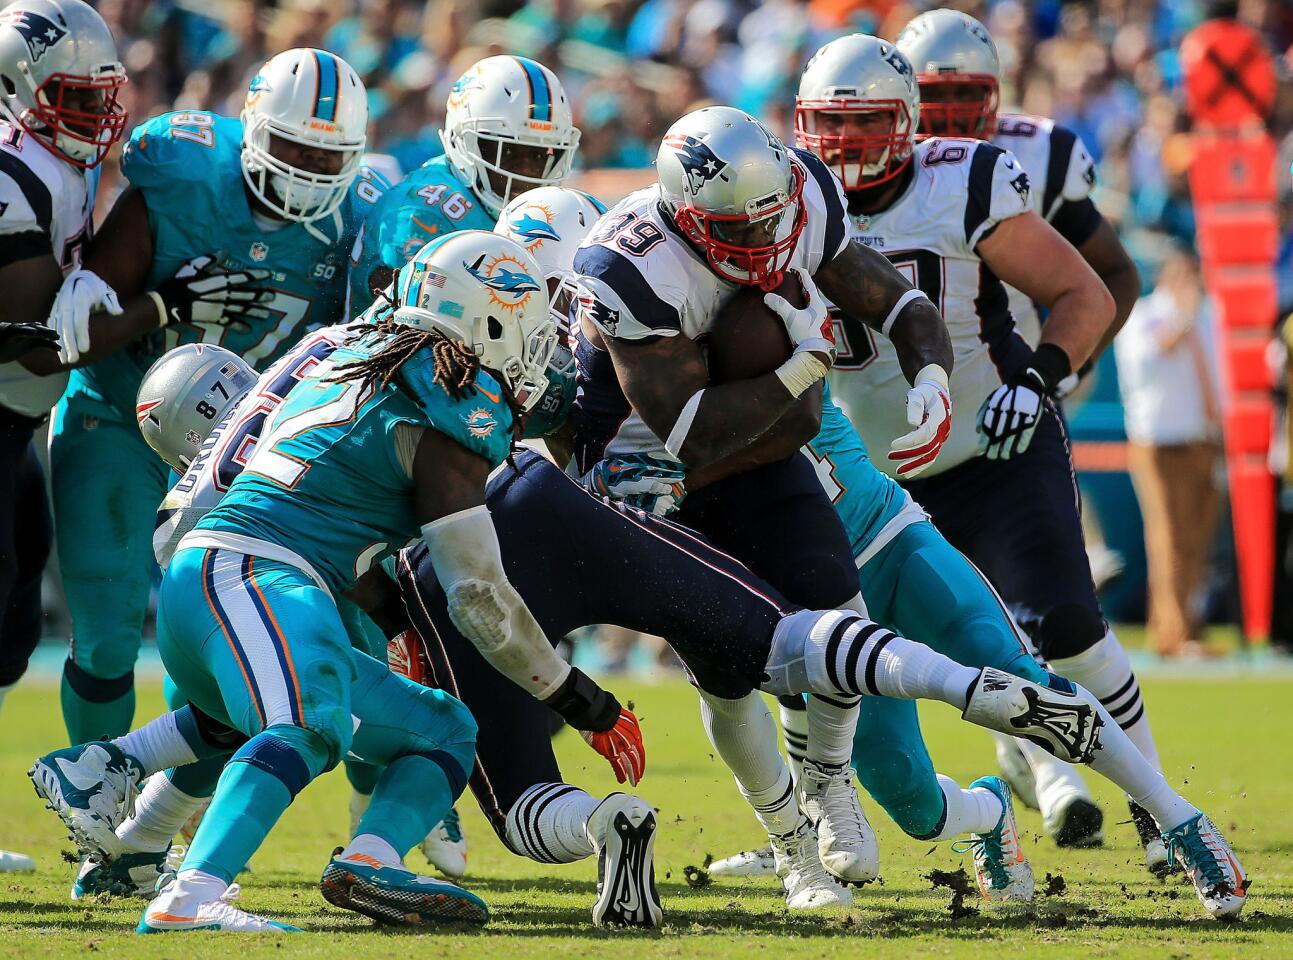 Patriots thought they could beat Miami with a run-only offense